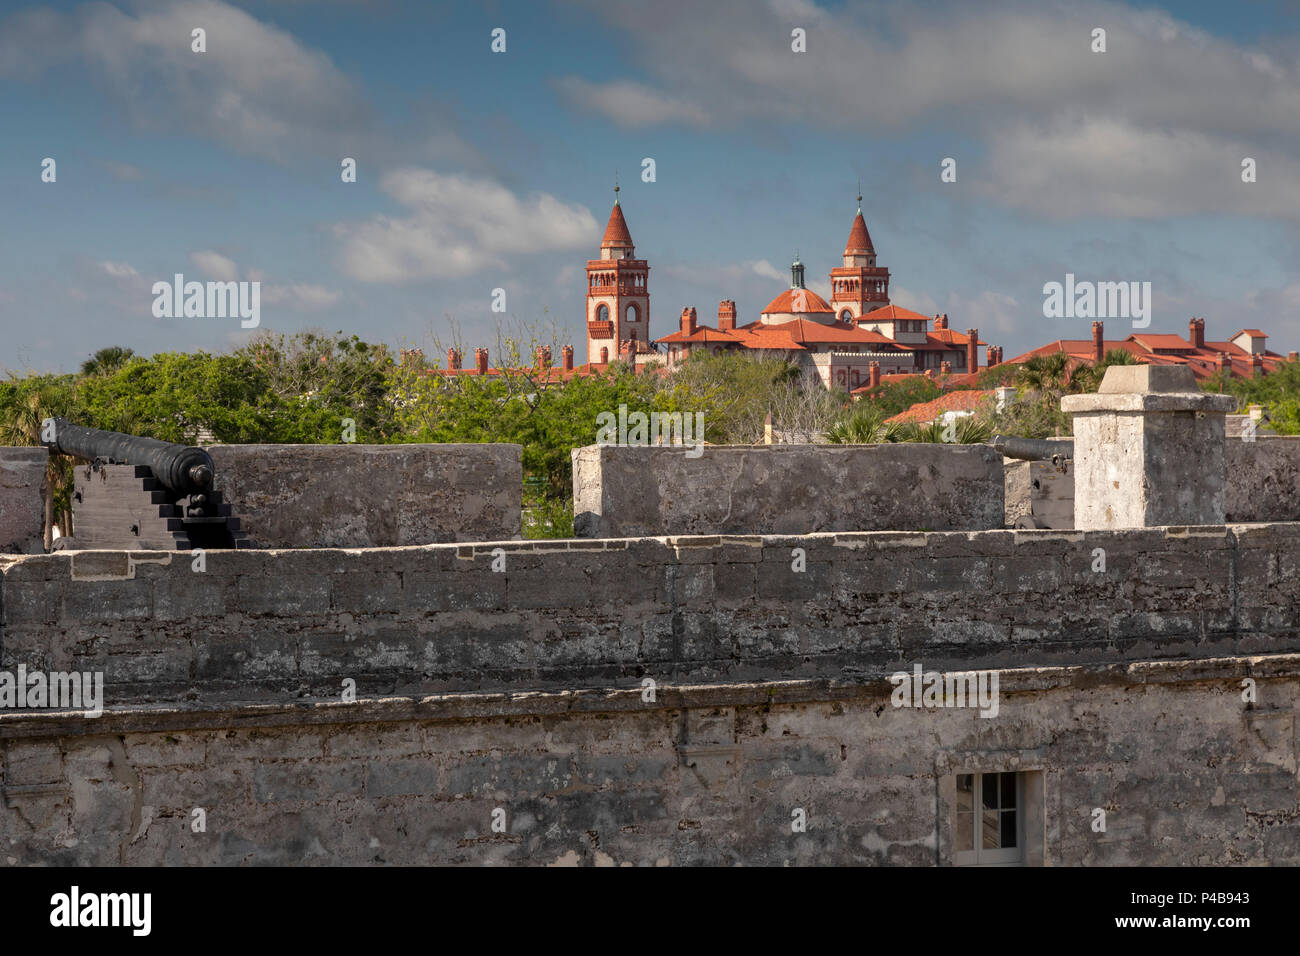 St. Augustine, Florida - Flagler College, beyond the walls of Castillo de San Marcos, The Spanish built the fort, now a National Monument, in the late Stock Photo